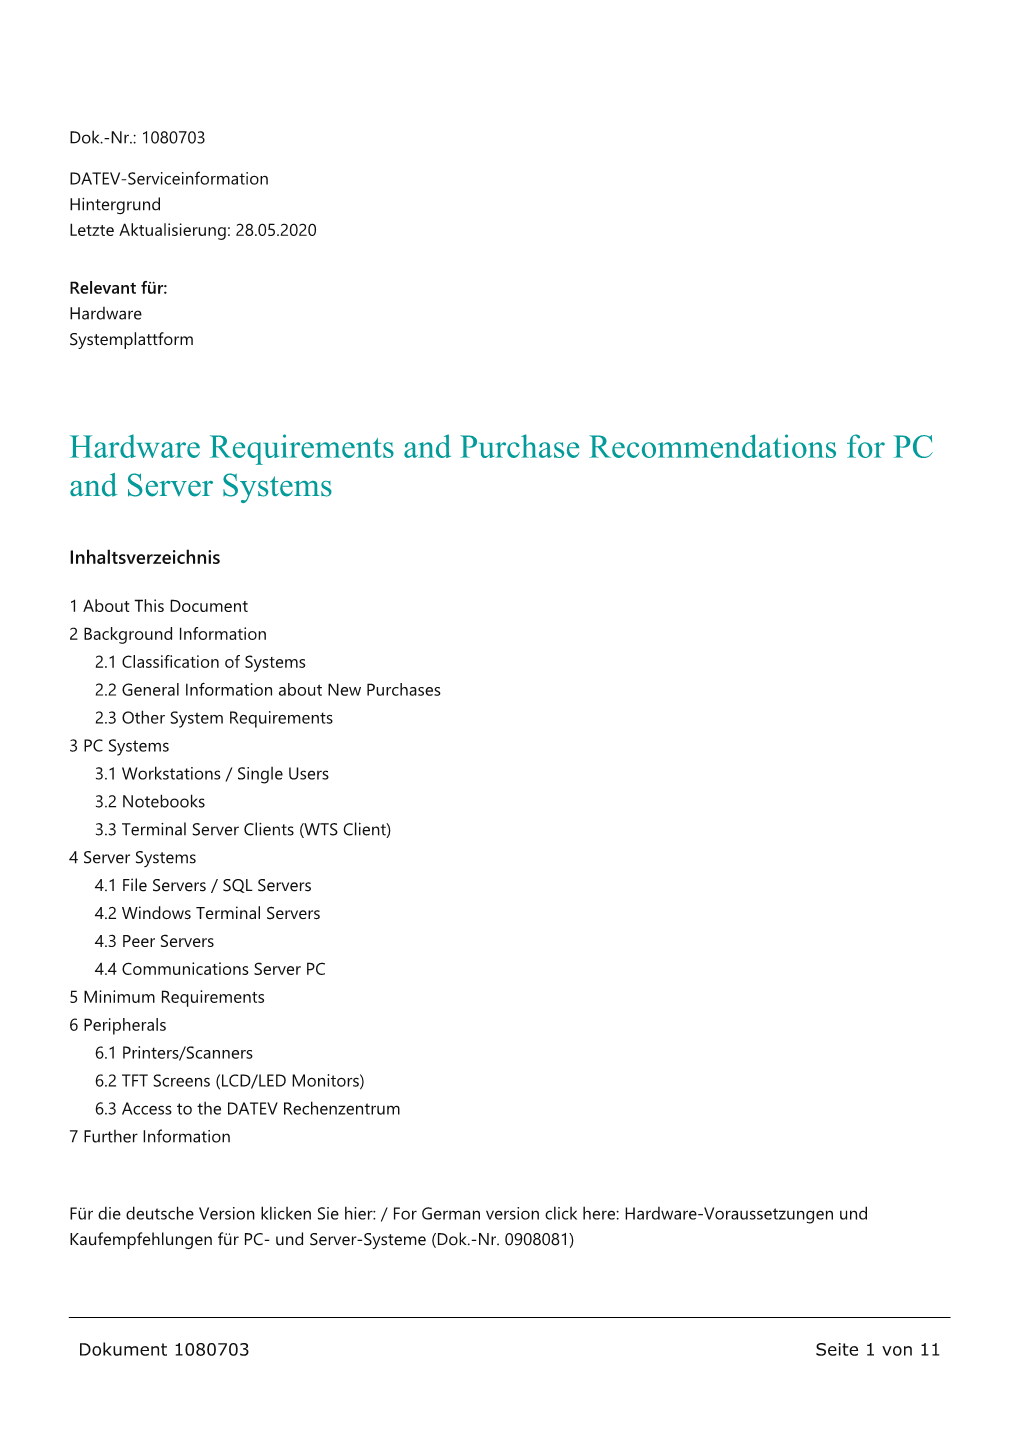 Hardware Requirements and Purchase Recommendations for PC and Server Systems